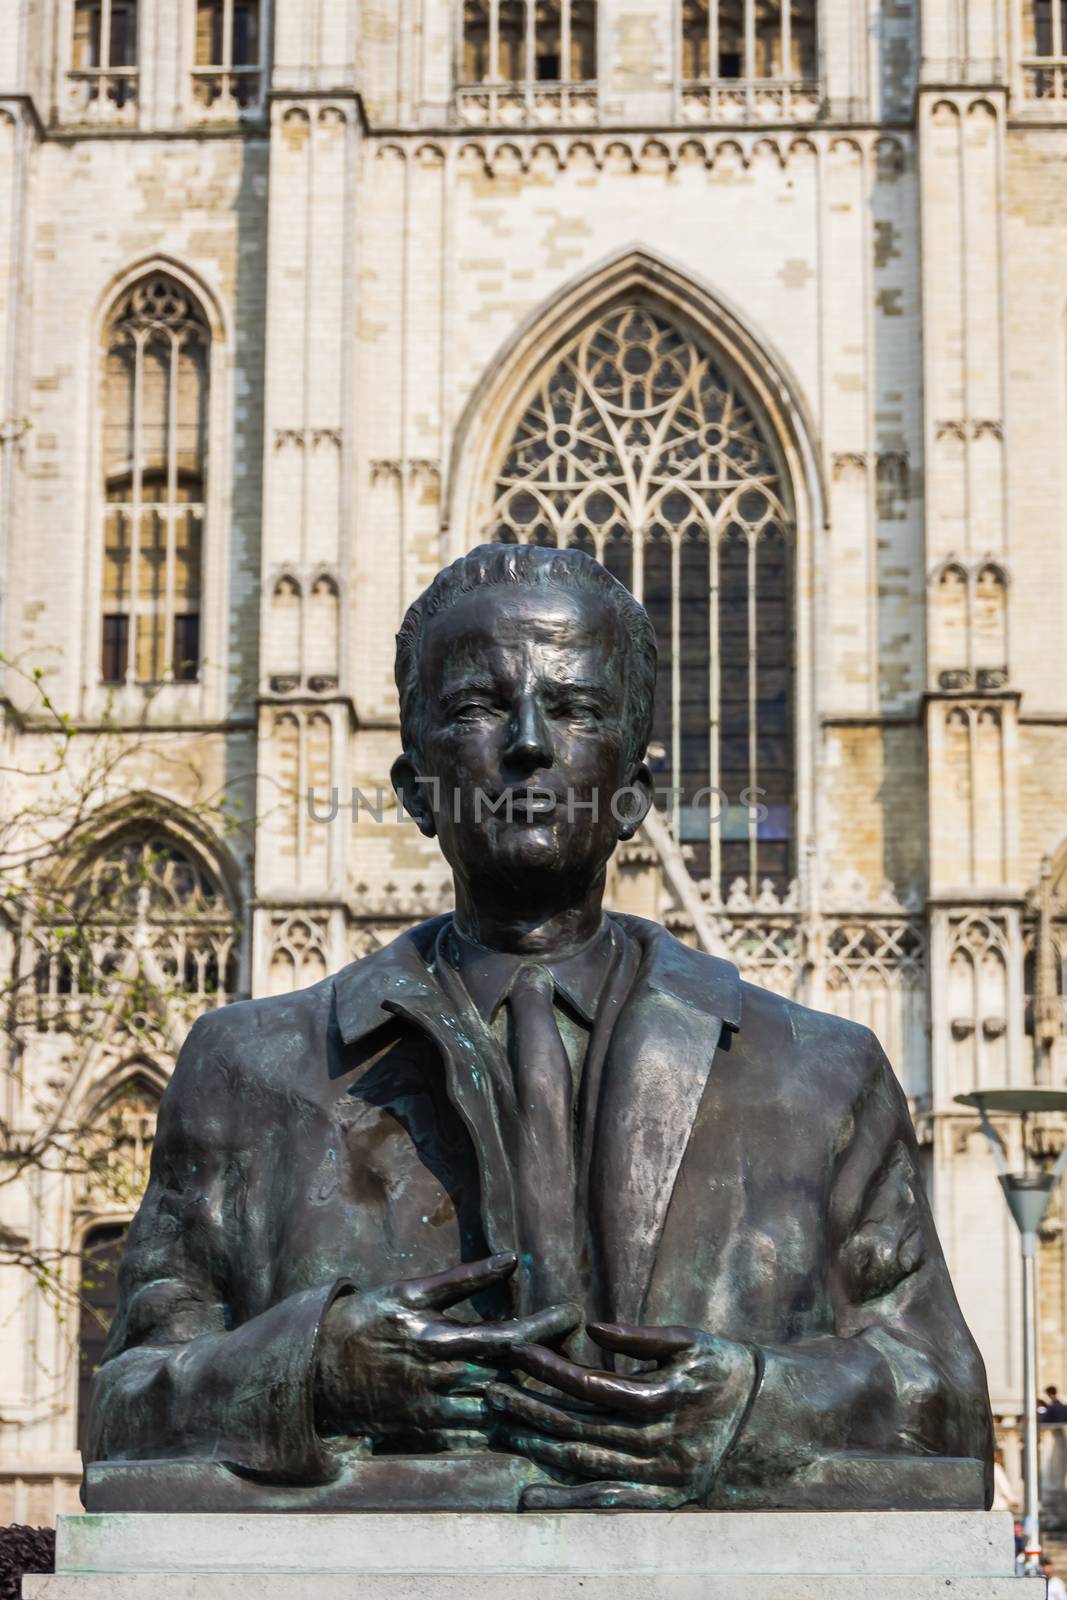 Monument to King Baudouin in front of the St. Michael and Gudula Cathedral in Brussels, on May 2, 2013. The Belgian monarch King Baudouin's reign lasted for 43 years, from 1950 until 1993.